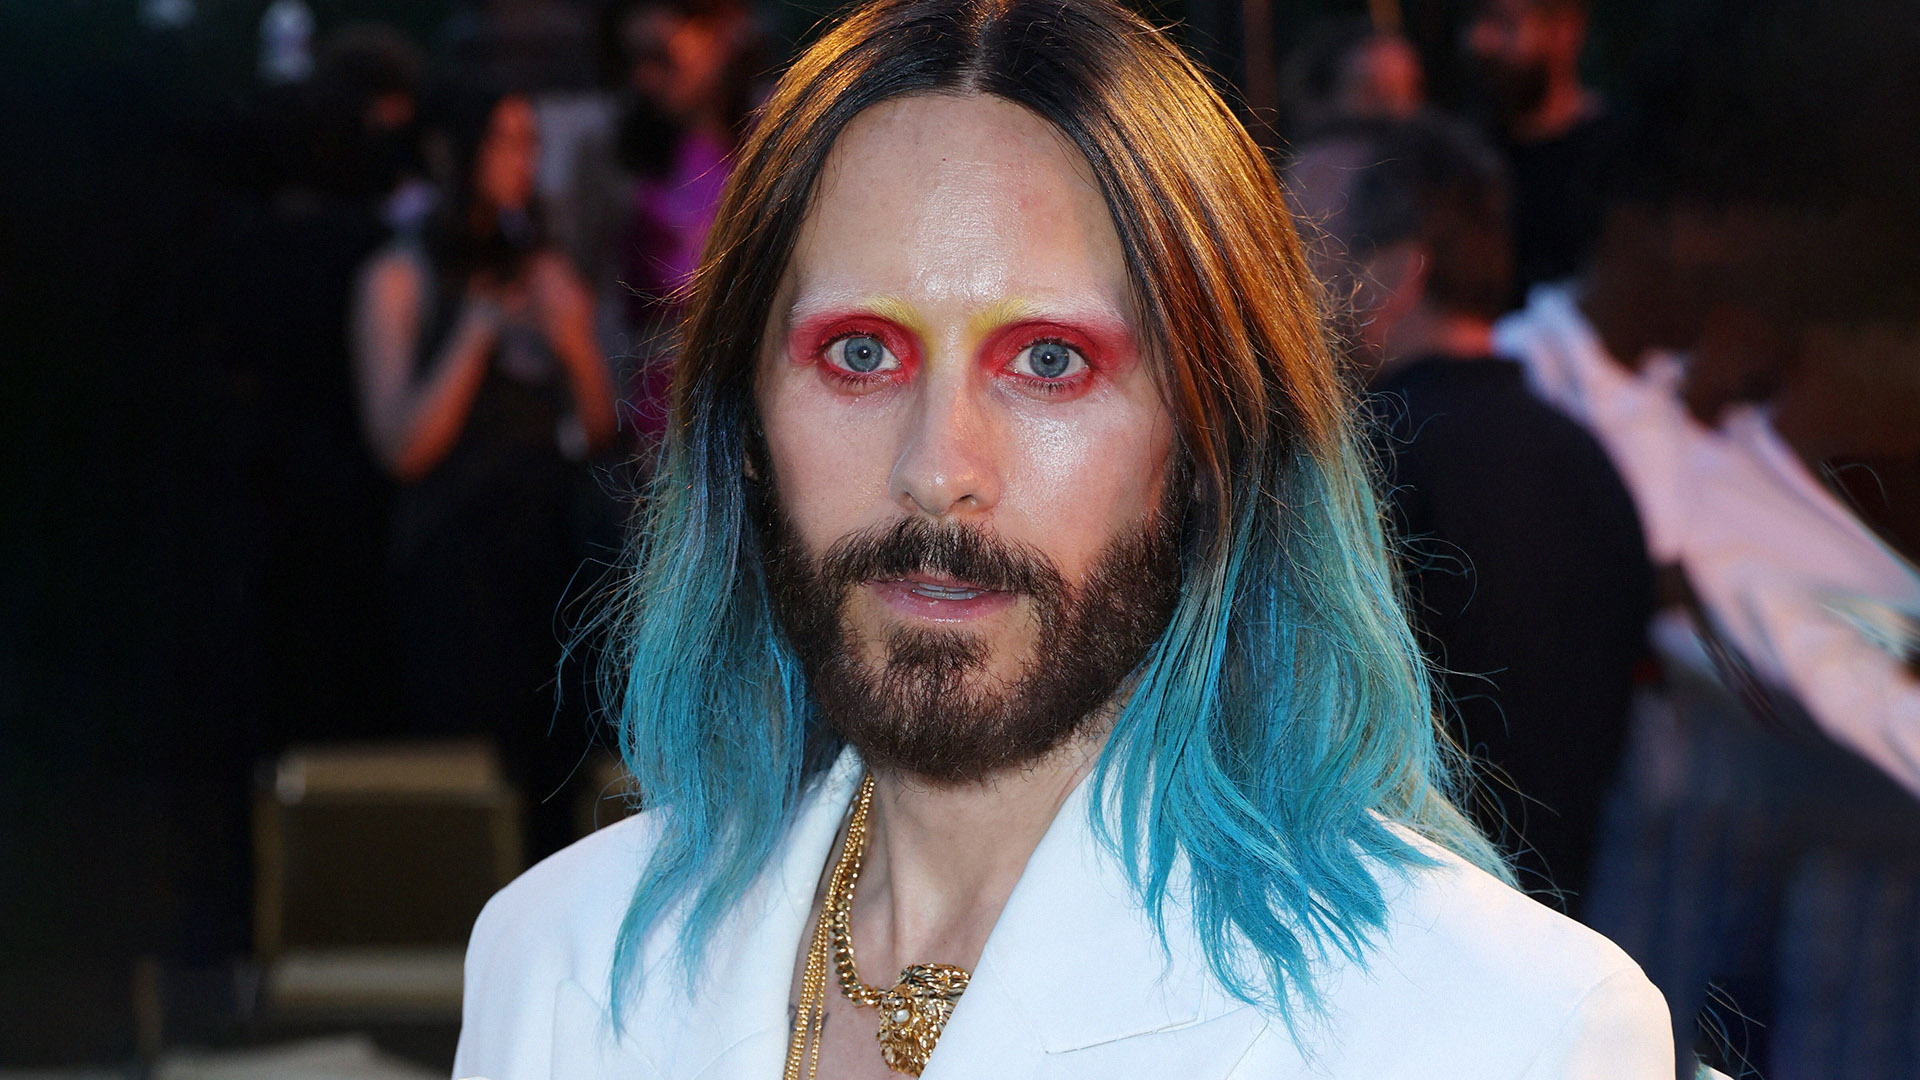 Here's Why Everyone's Talking About Jared Leto's MTV VMA Appearance